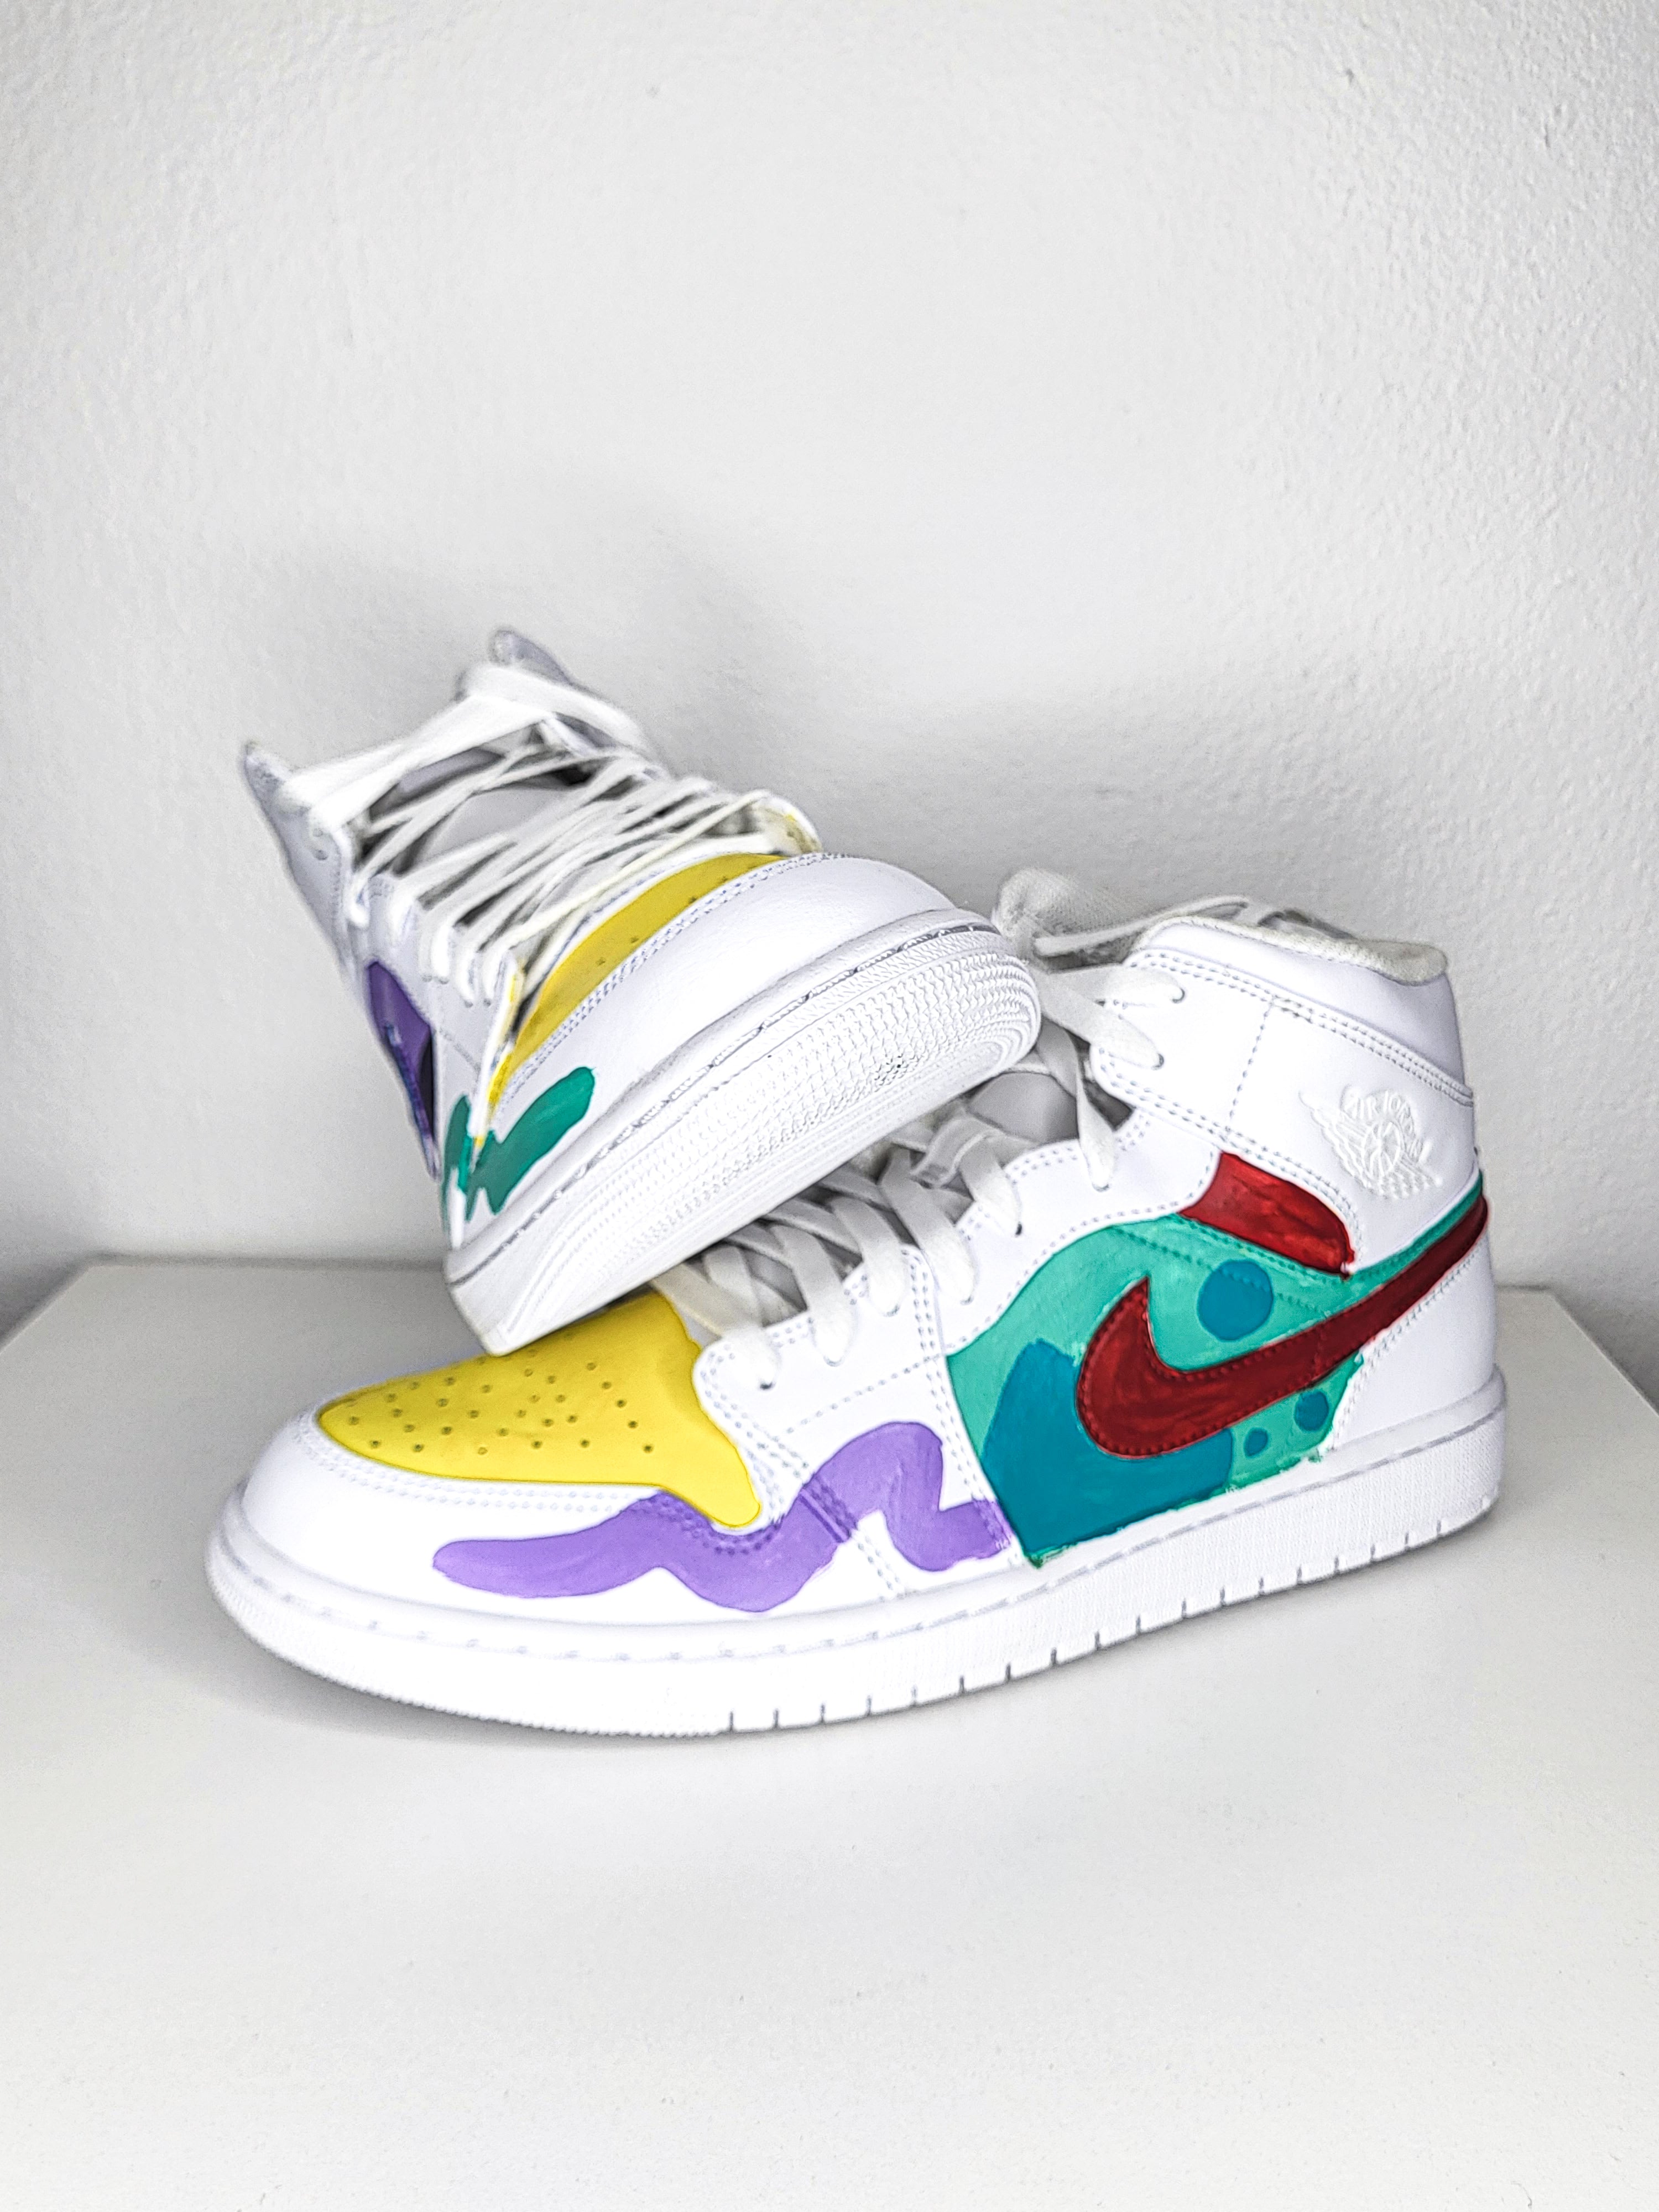 "Hues and Shapes II" Shoes by Jay McKay